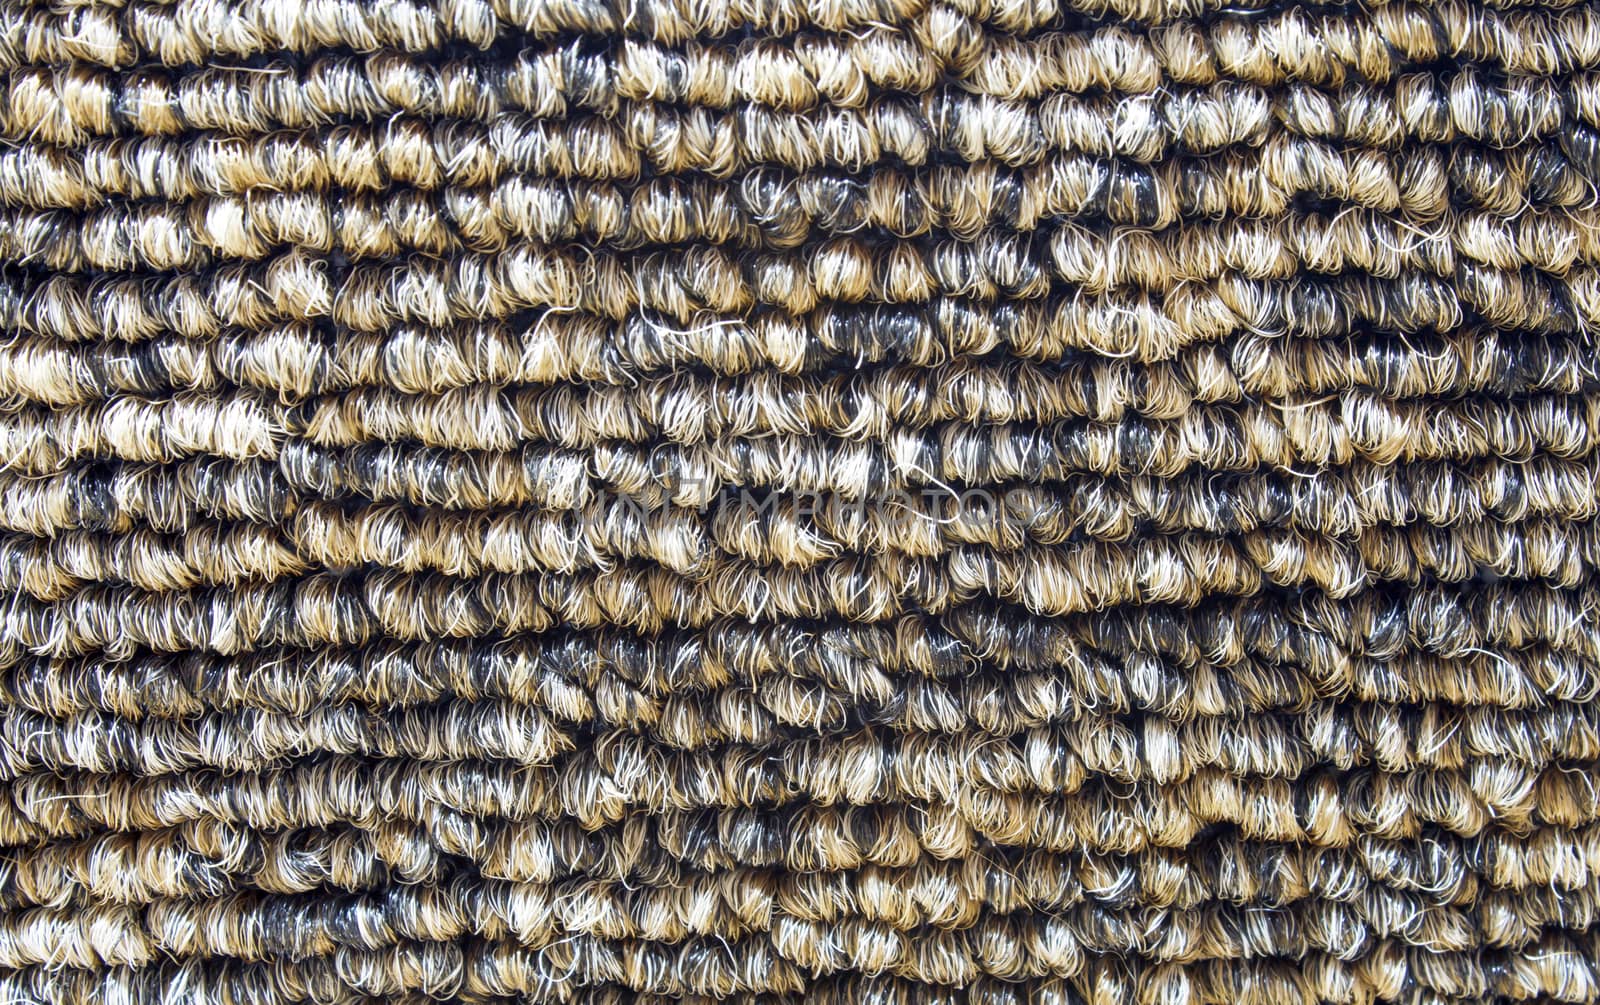 Detailed shot of natural colored industrial carpet.